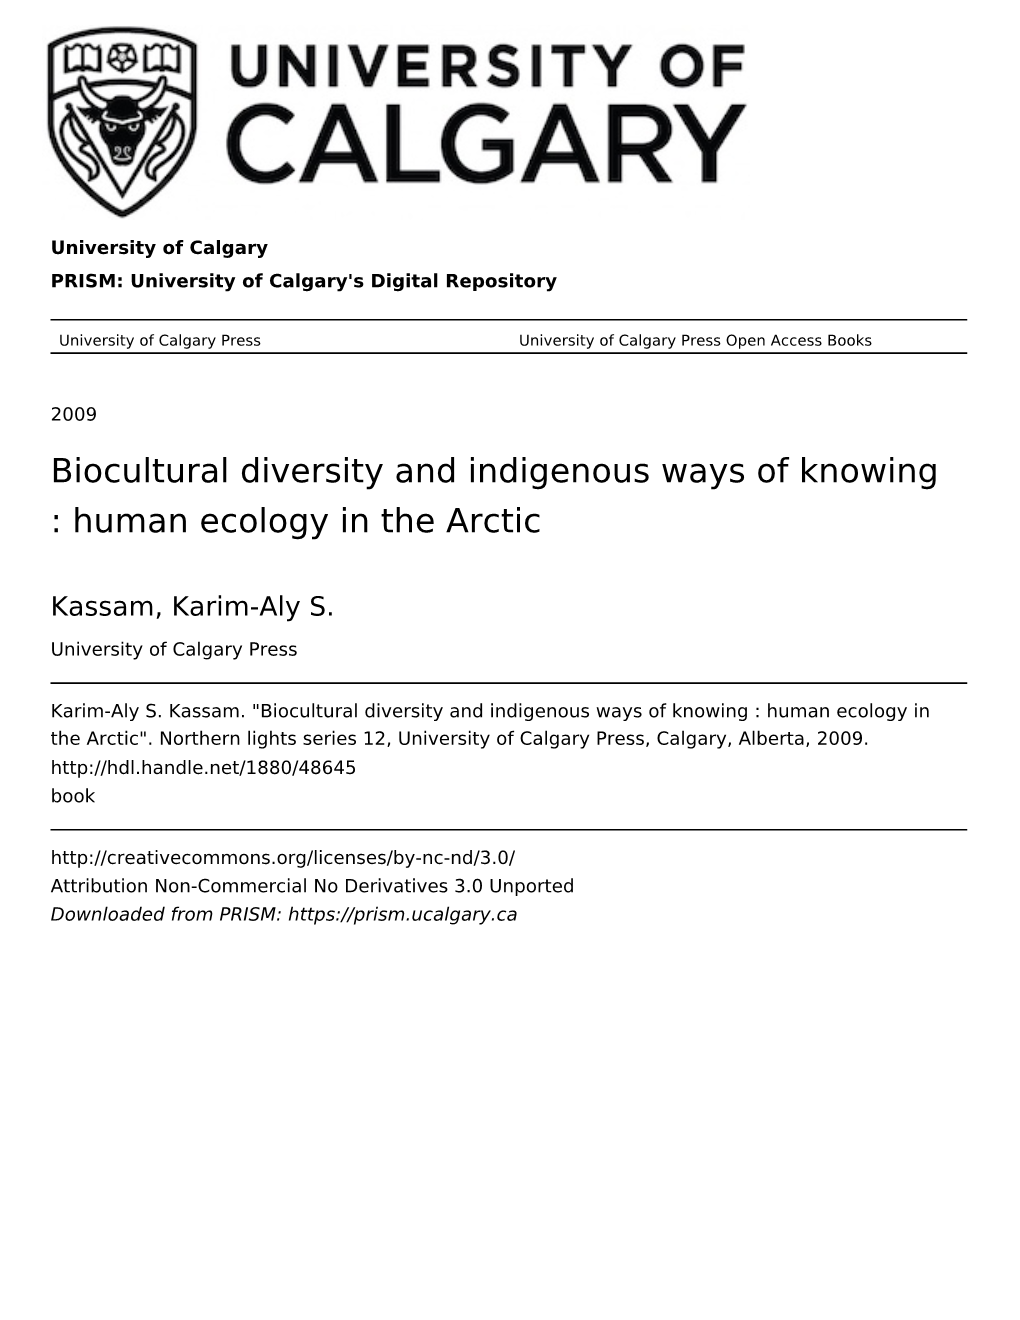 Biocultural Diversity and Indigenous Ways of Knowing : Human Ecology in the Arctic